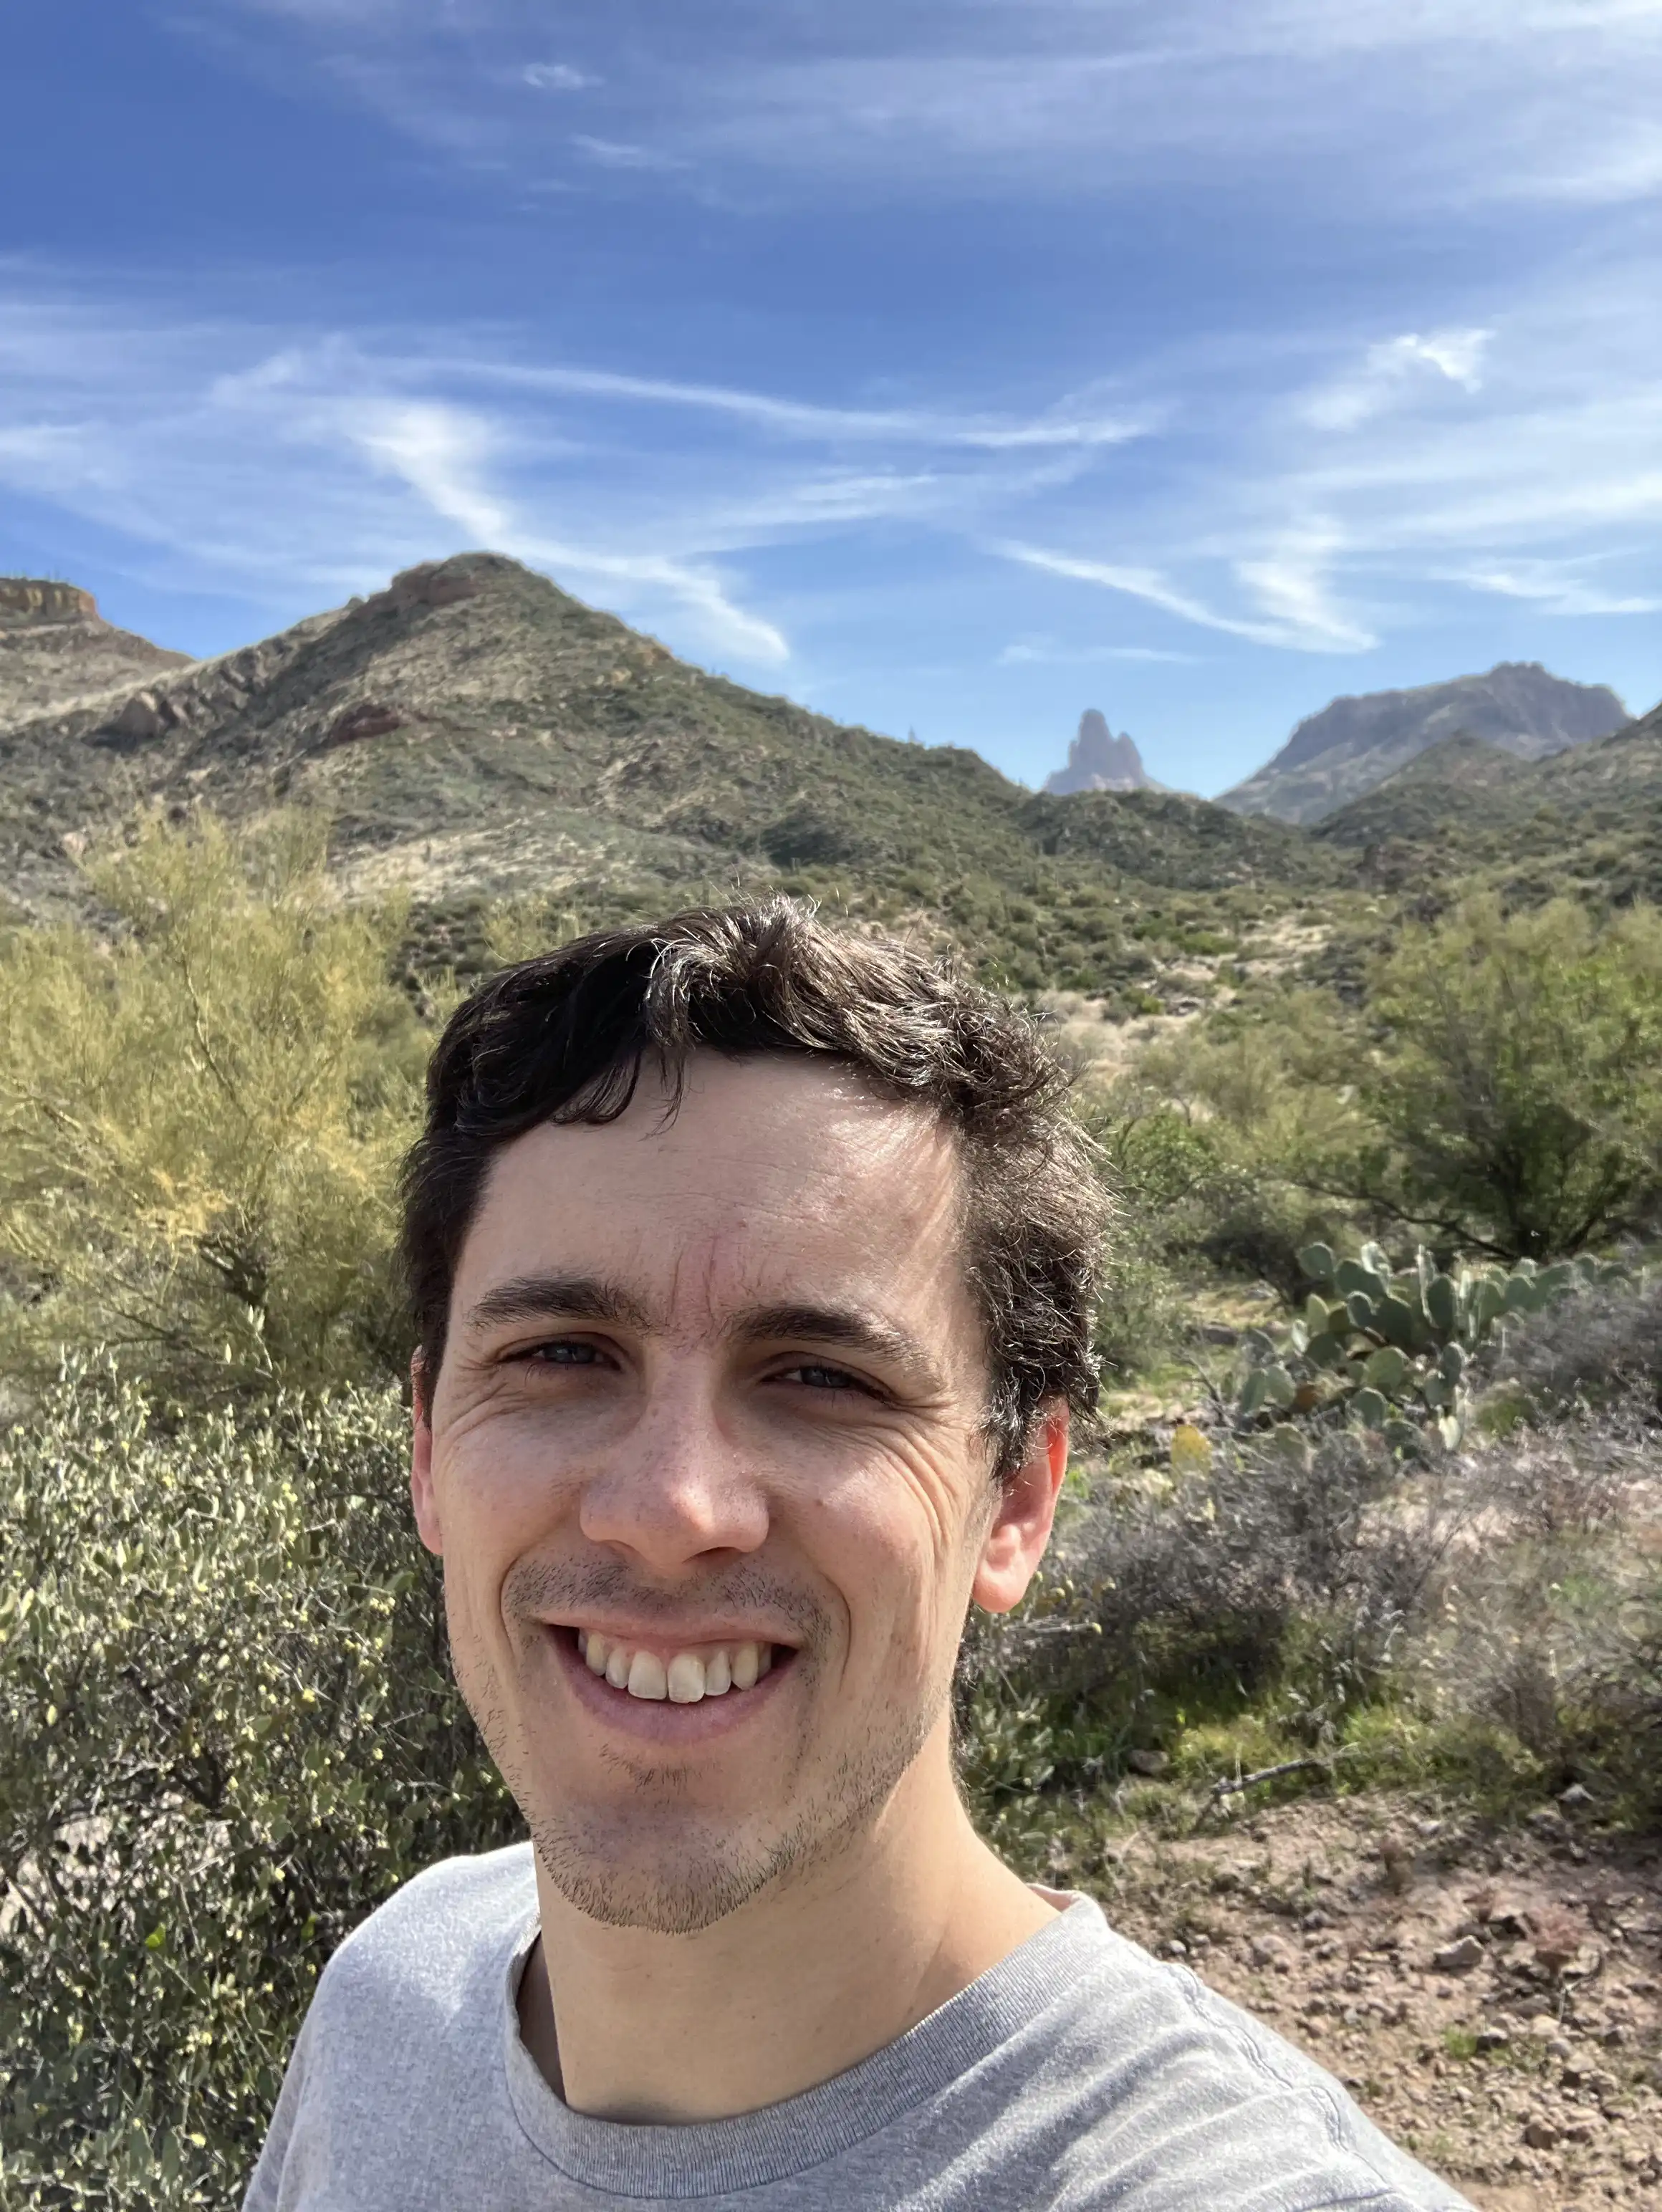 Alex with a view of saguaro cacti, rocks and brush from Tonto National Forest in the background.